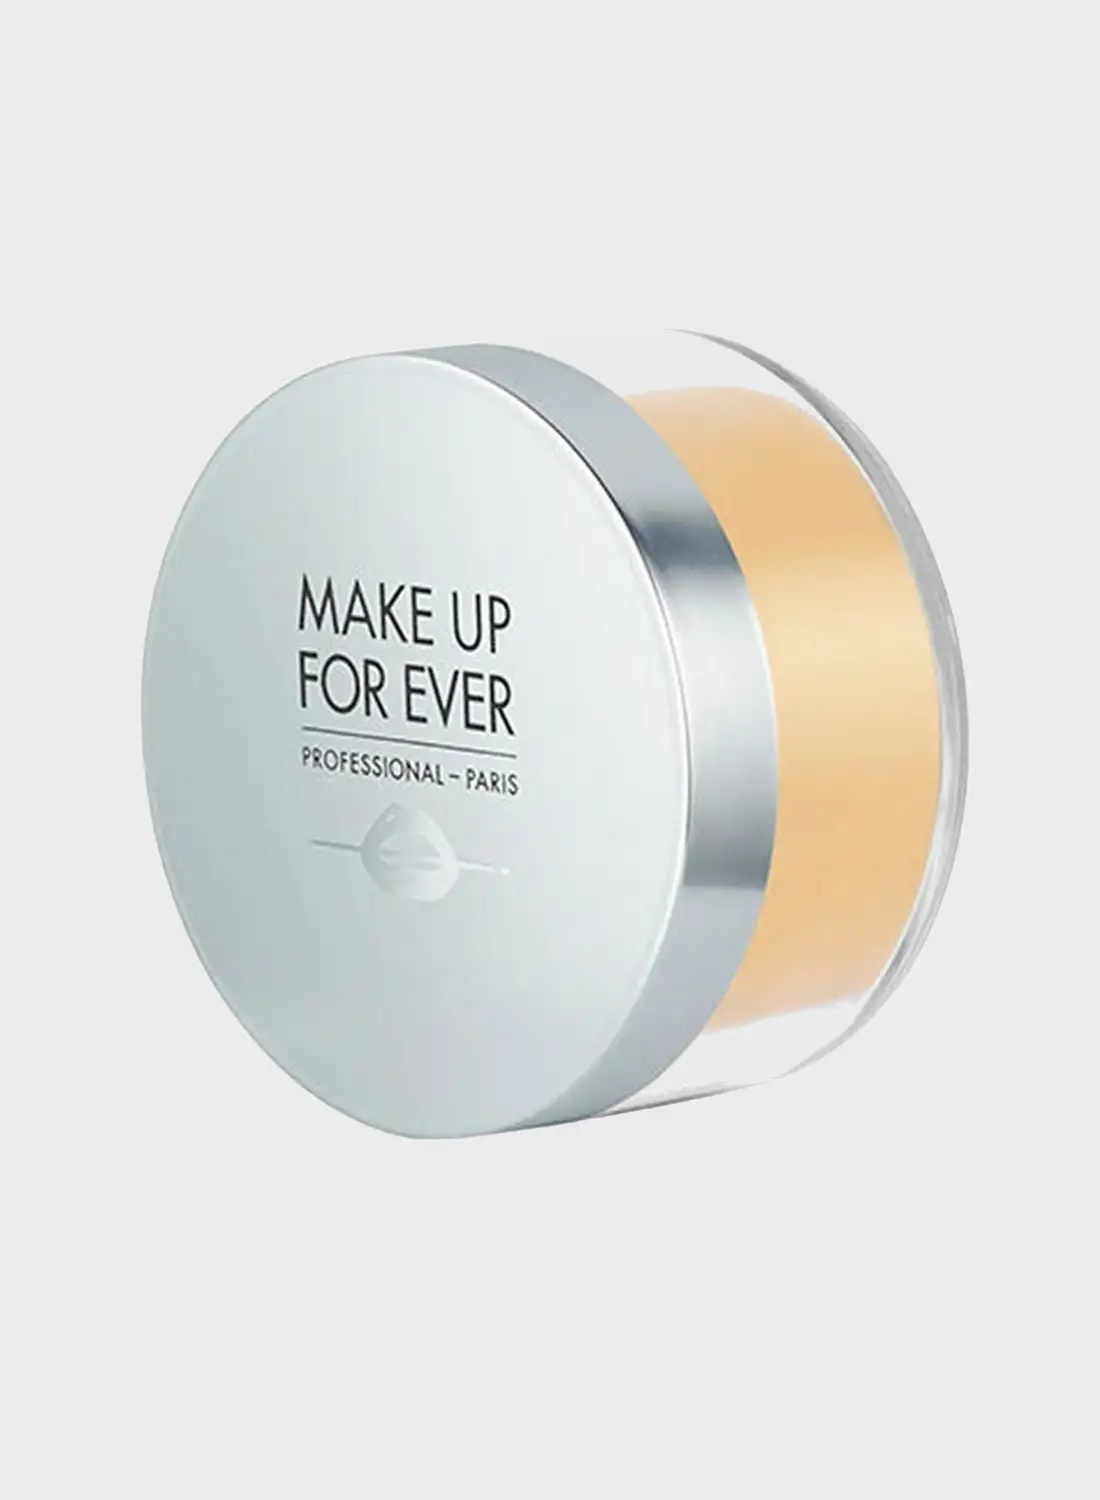 MAKE UP FOR EVER Ultra Hd Setting Powder 4 Golden Beige - Travel Size